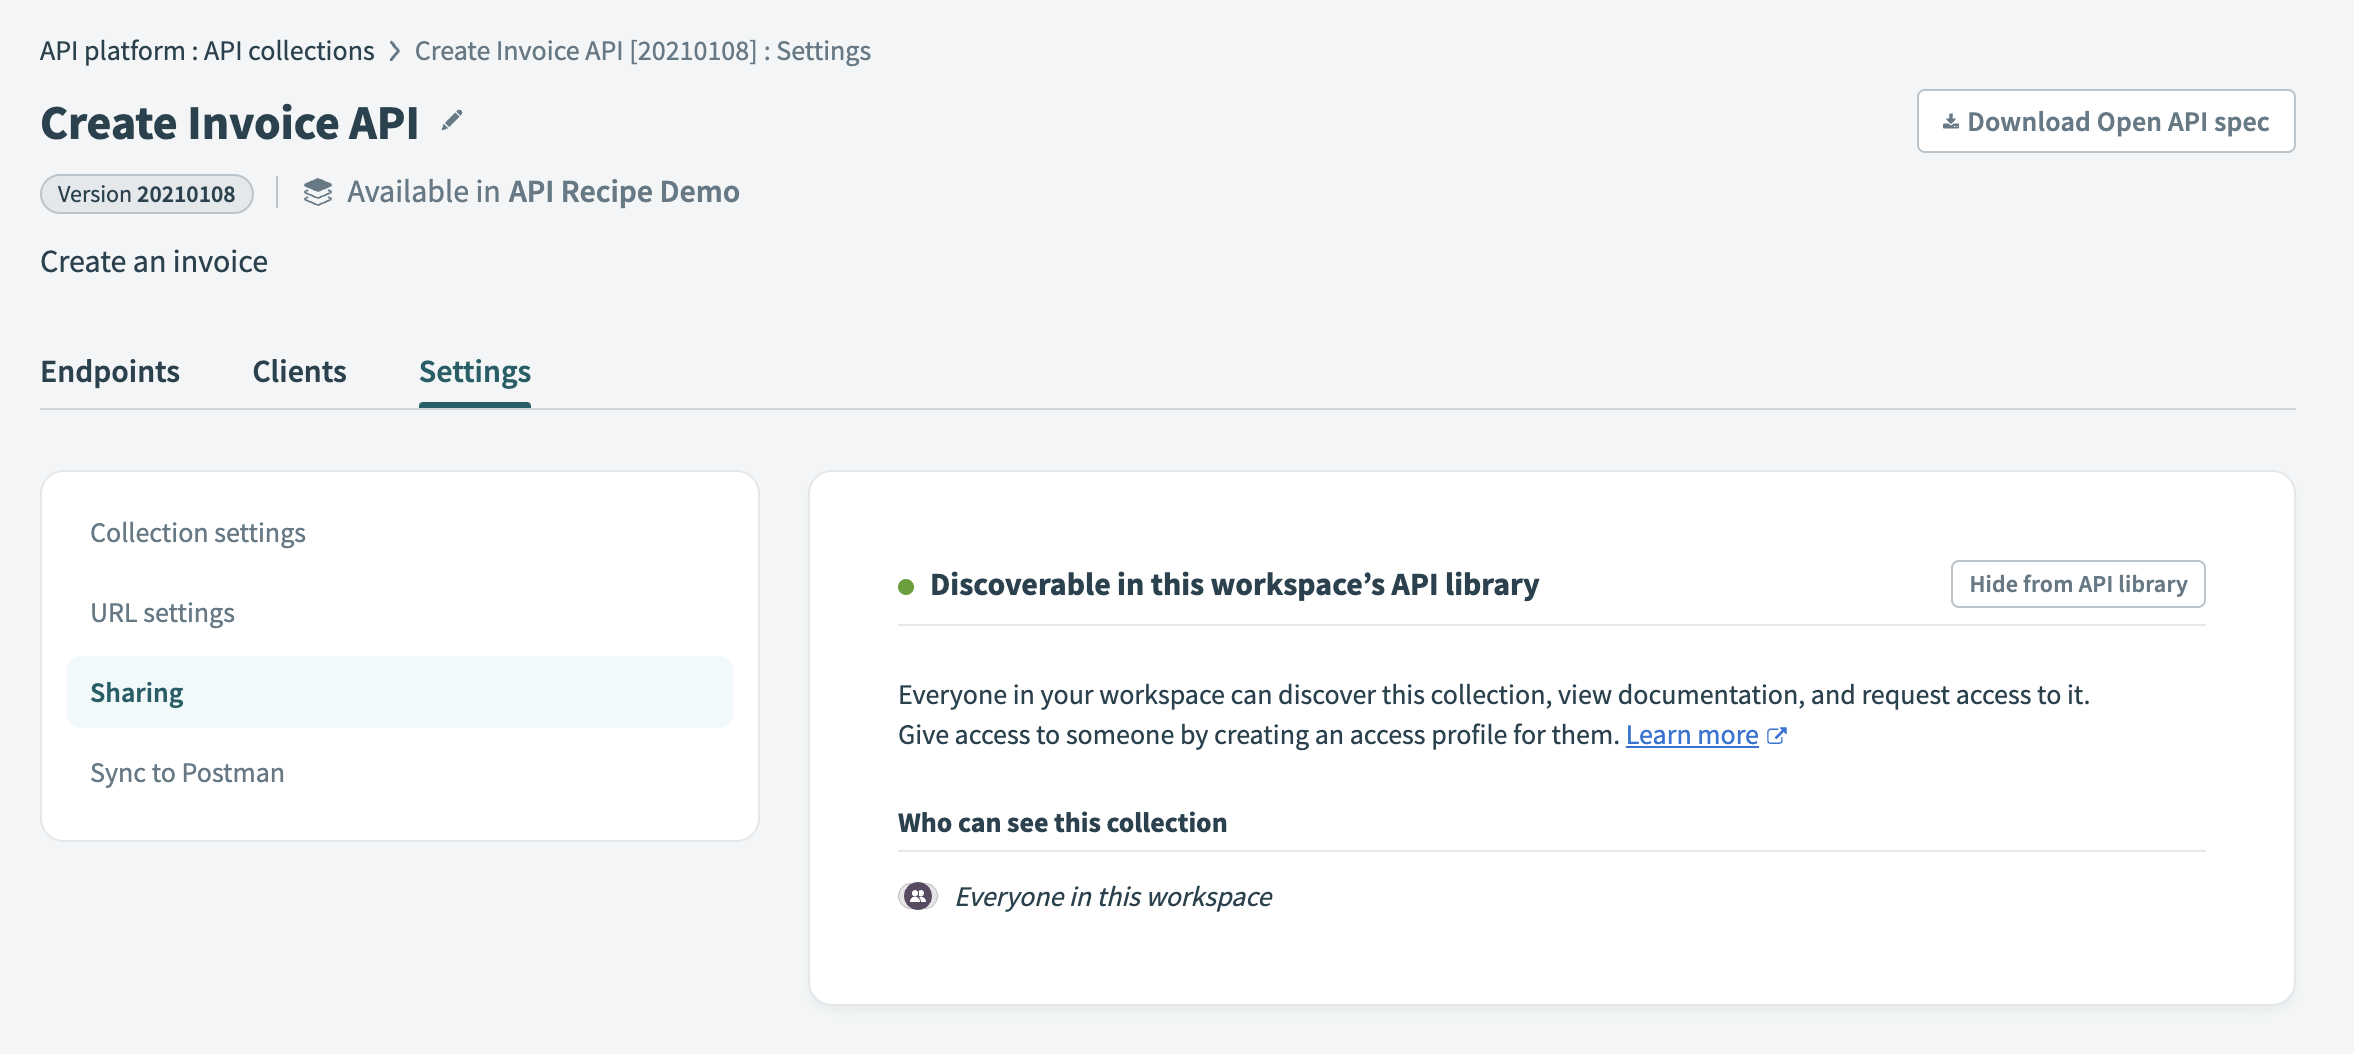 API collection is discoverable in the API library